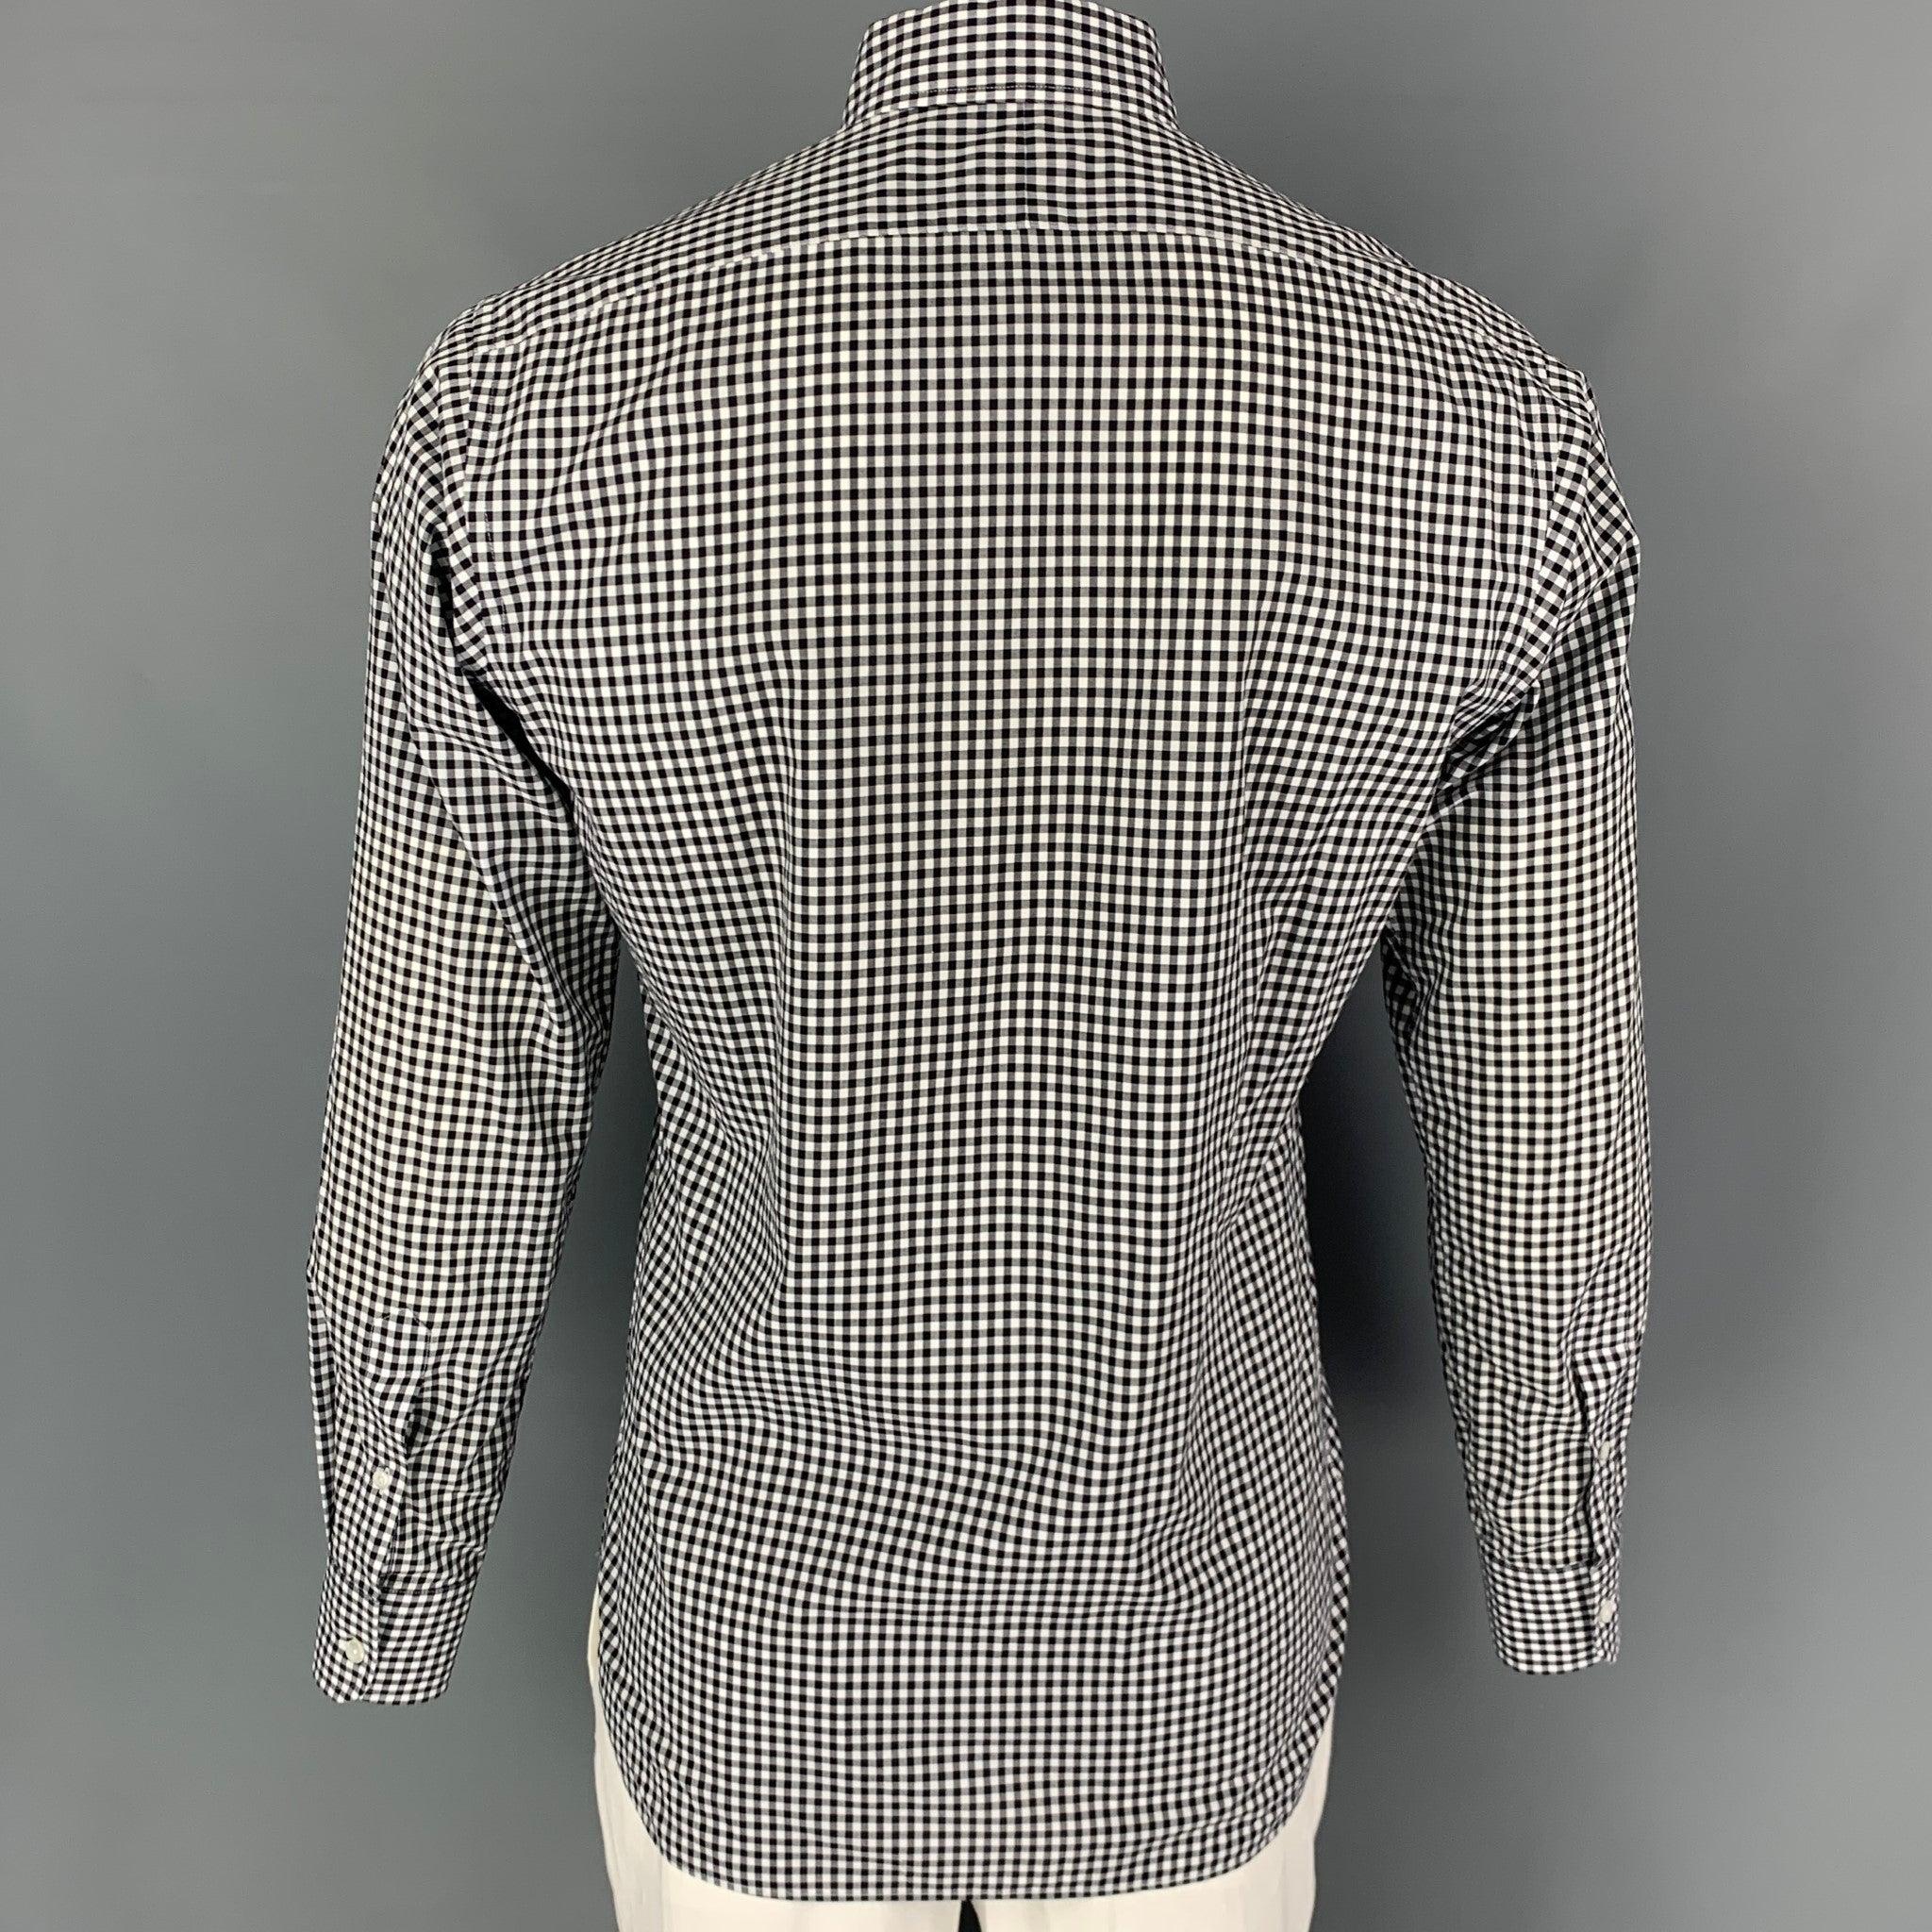 HAMILTON Size L Black White Gingham Long Sleeve Shirt In Good Condition For Sale In San Francisco, CA